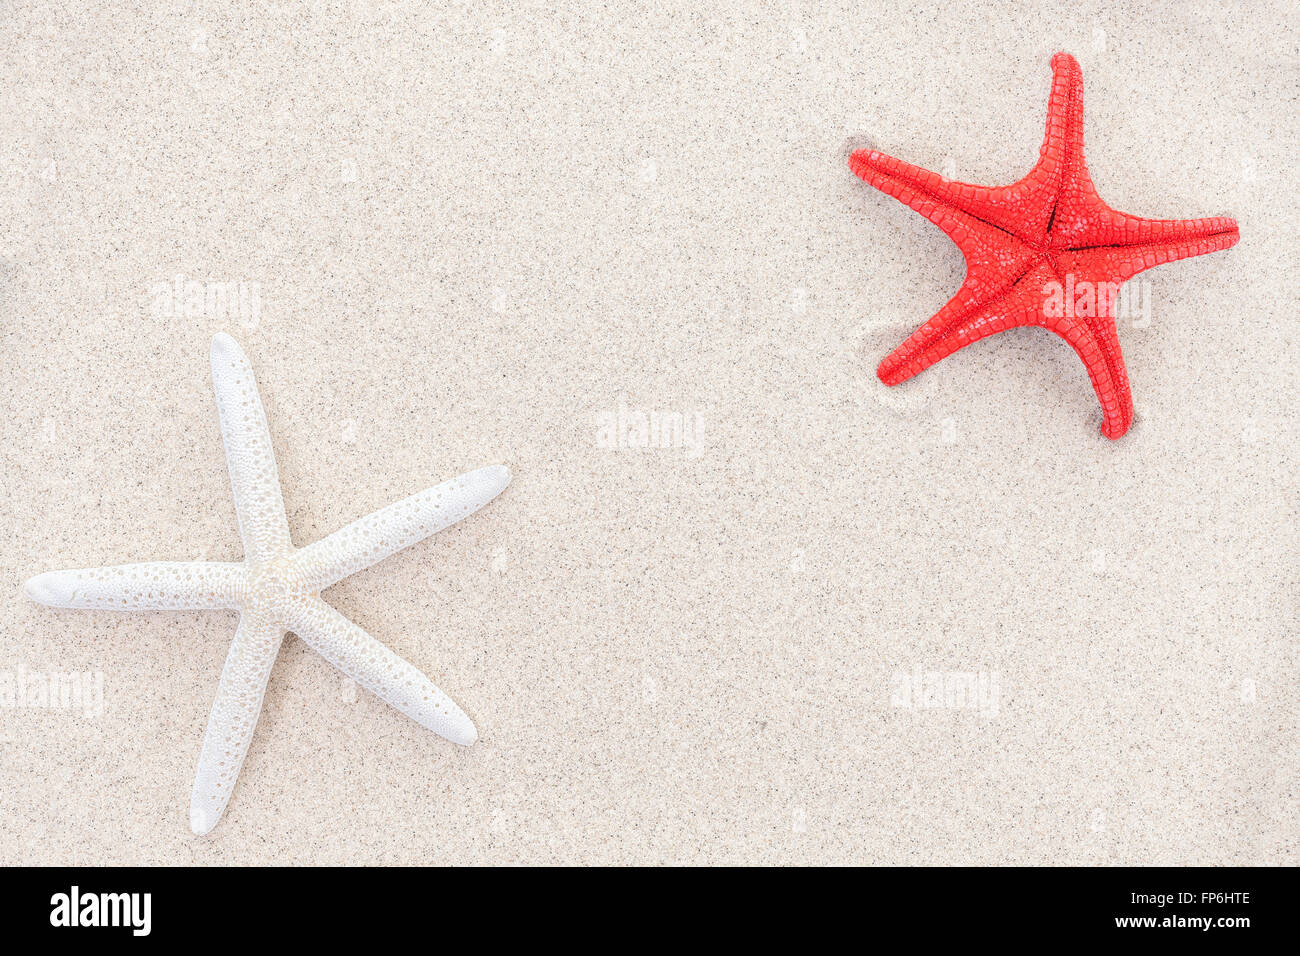 White and red starfishes on sand, space for text. Stock Photo